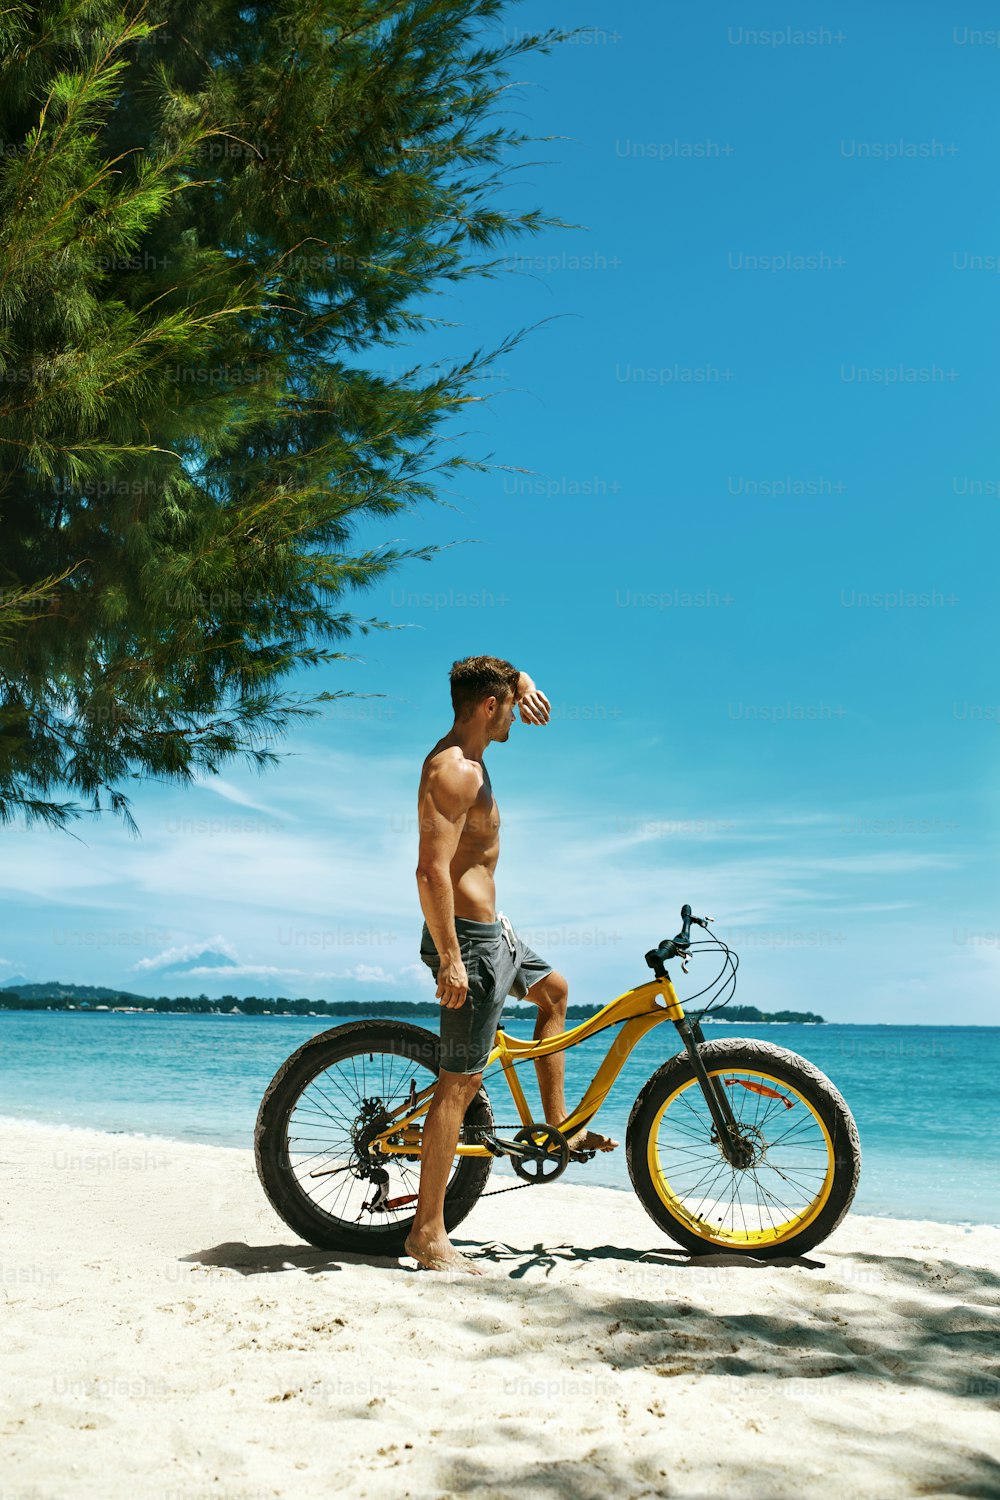 Summer Beach Sport. Athletic Man With Muscular Body Riding Yellow Sand Bicycle At Tropical Seaside. Fitness Male Model With Bike On Holiday Travel Vacation. Sporting Activity, Active Lifestyle Concept